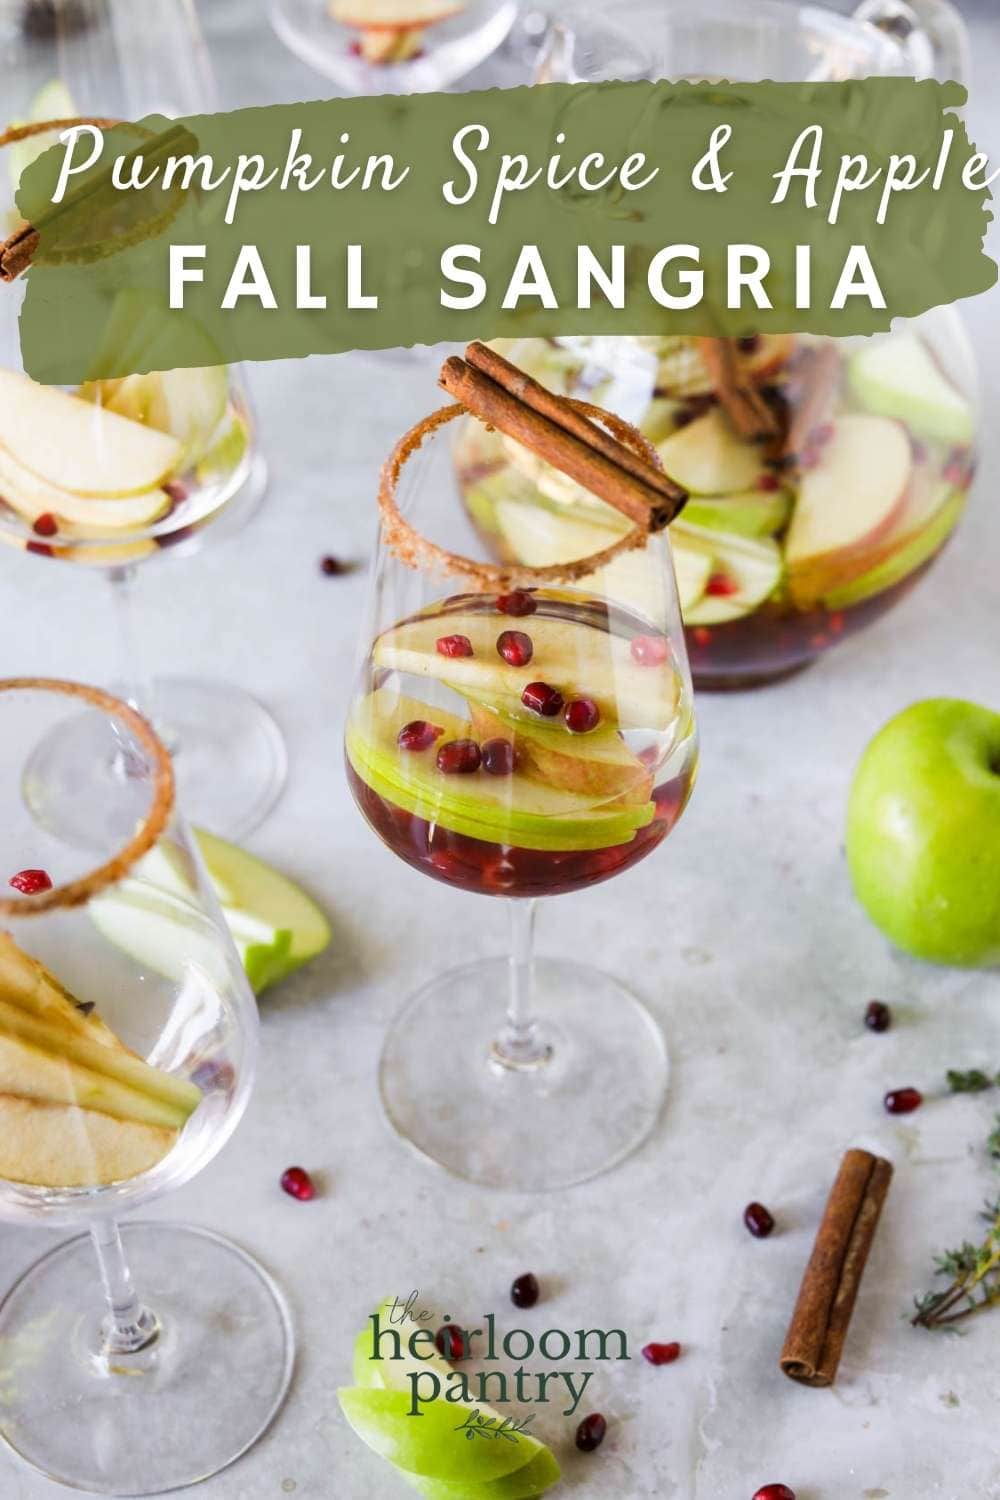 Fall Sangria with Apple and Pumpkin Spice - The Heirloom Pantry Pin